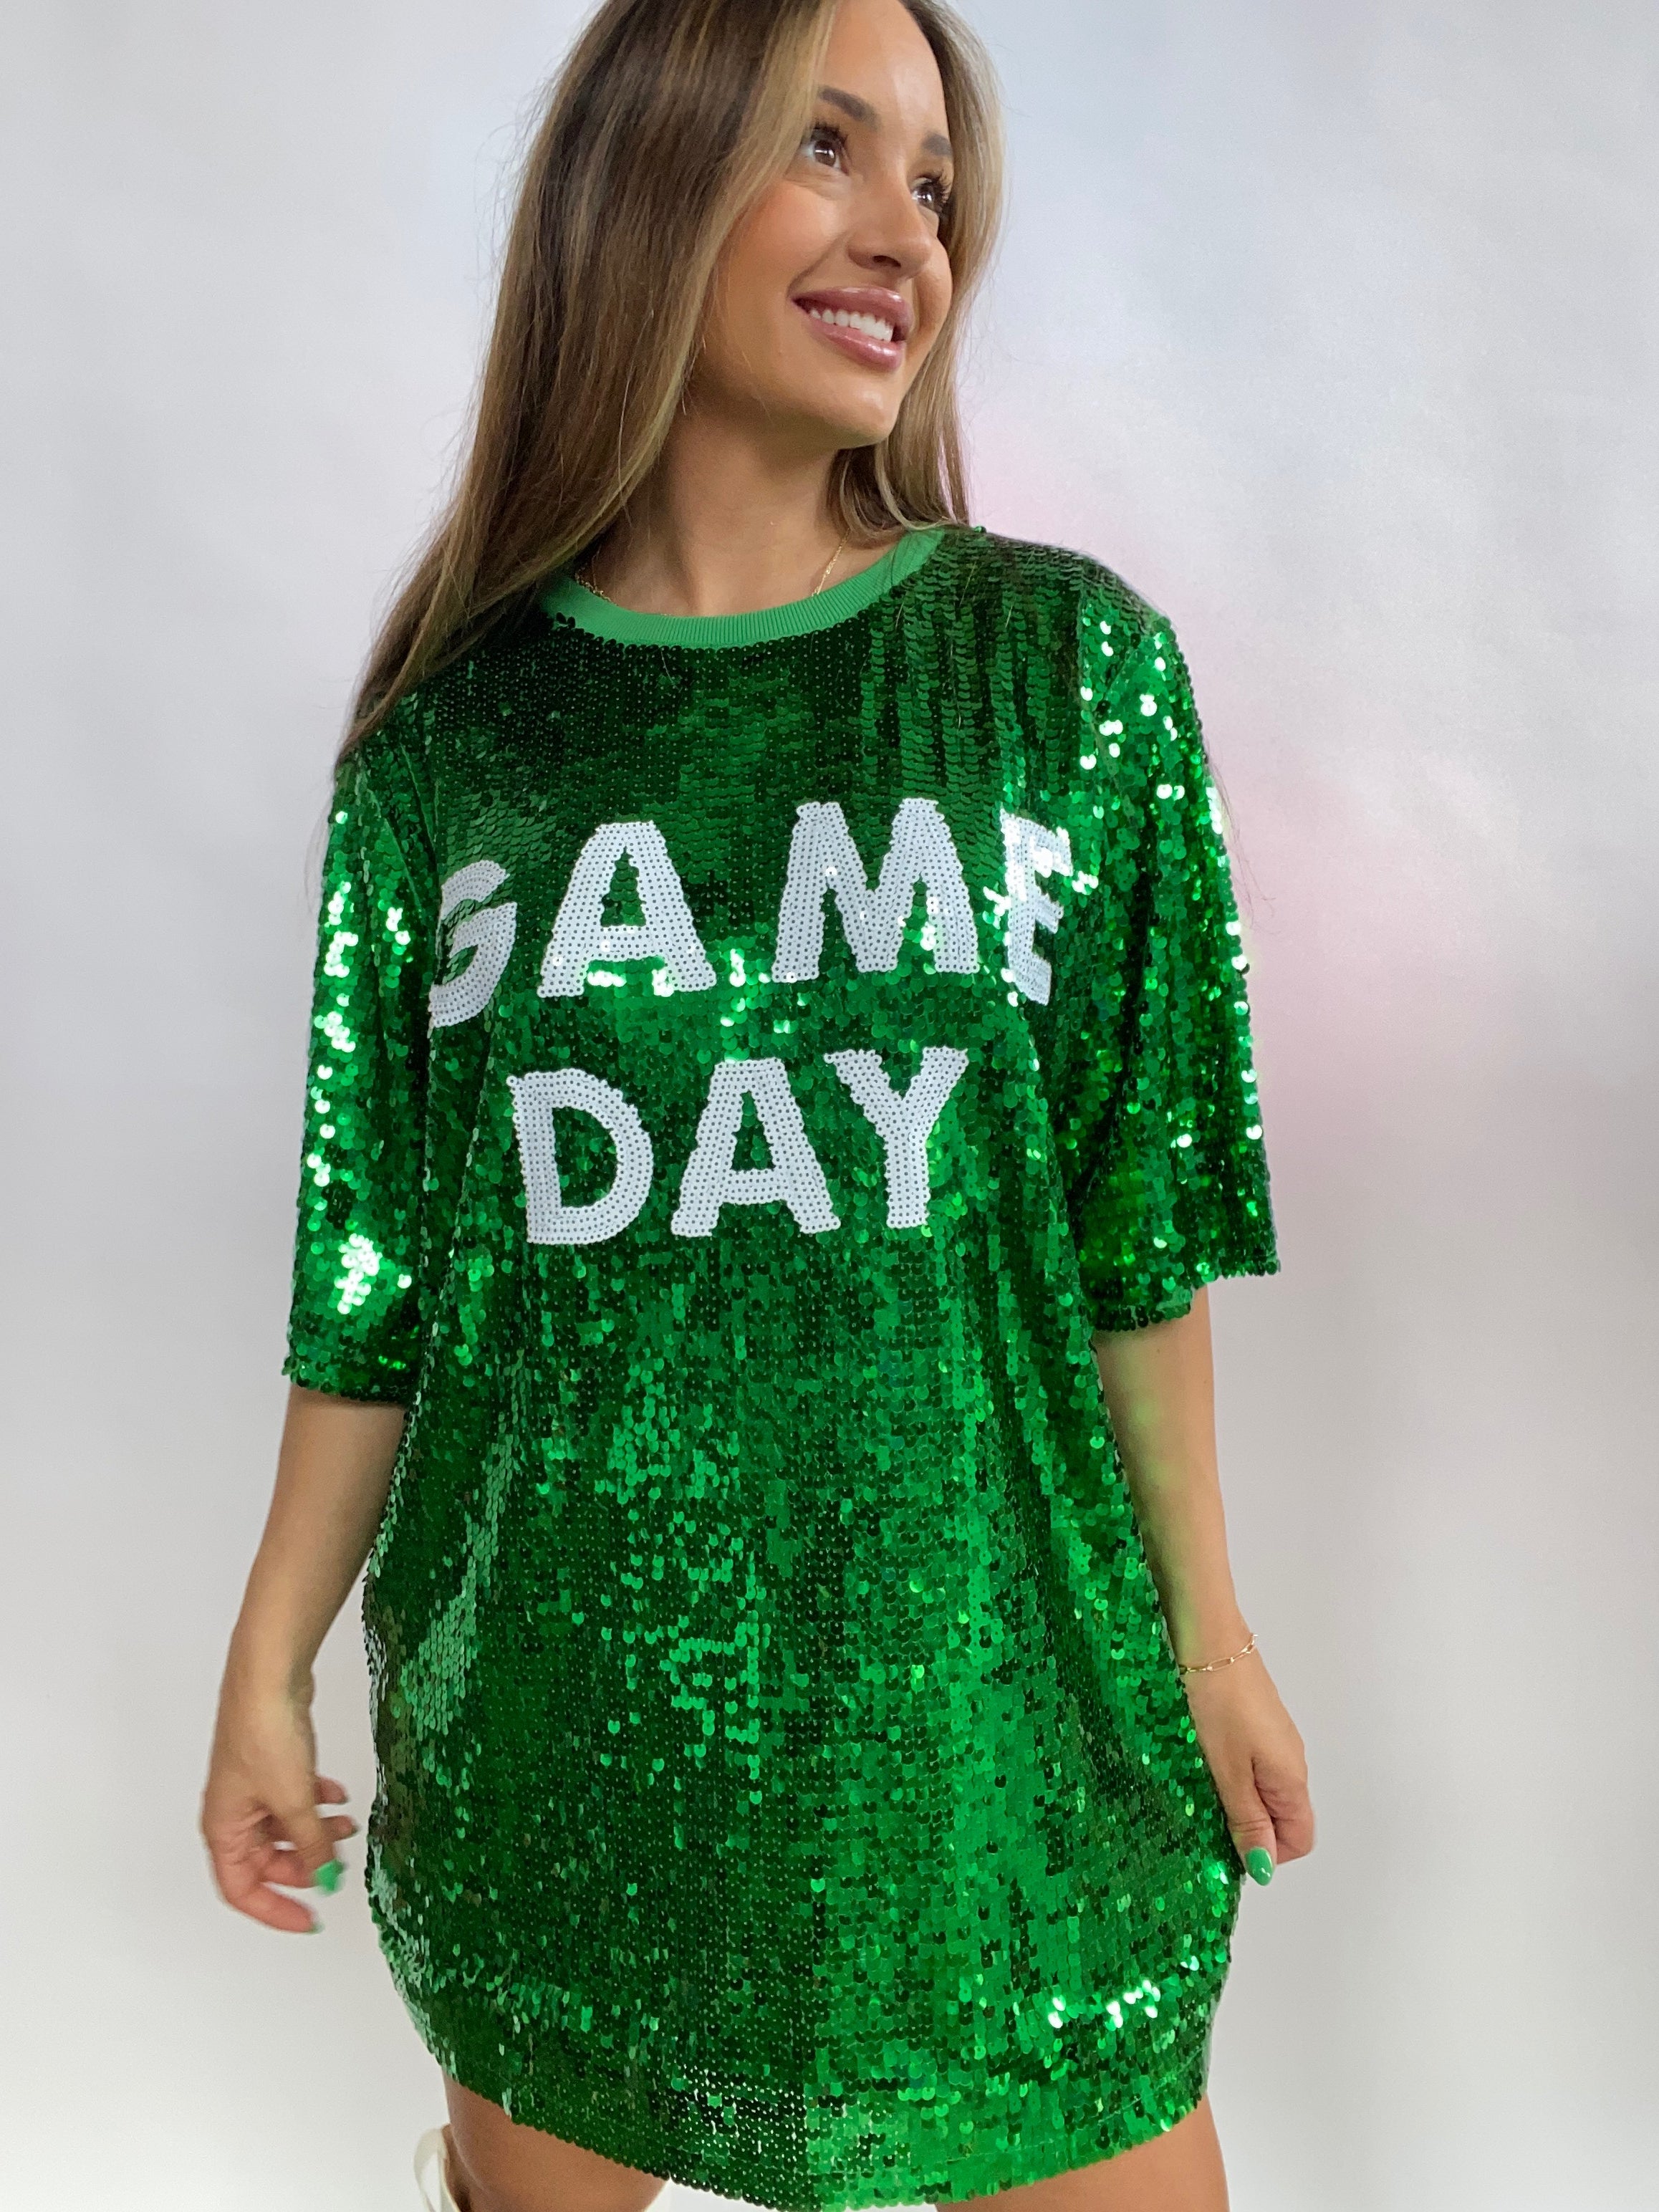 Game Day Sequin Dress - Green and White